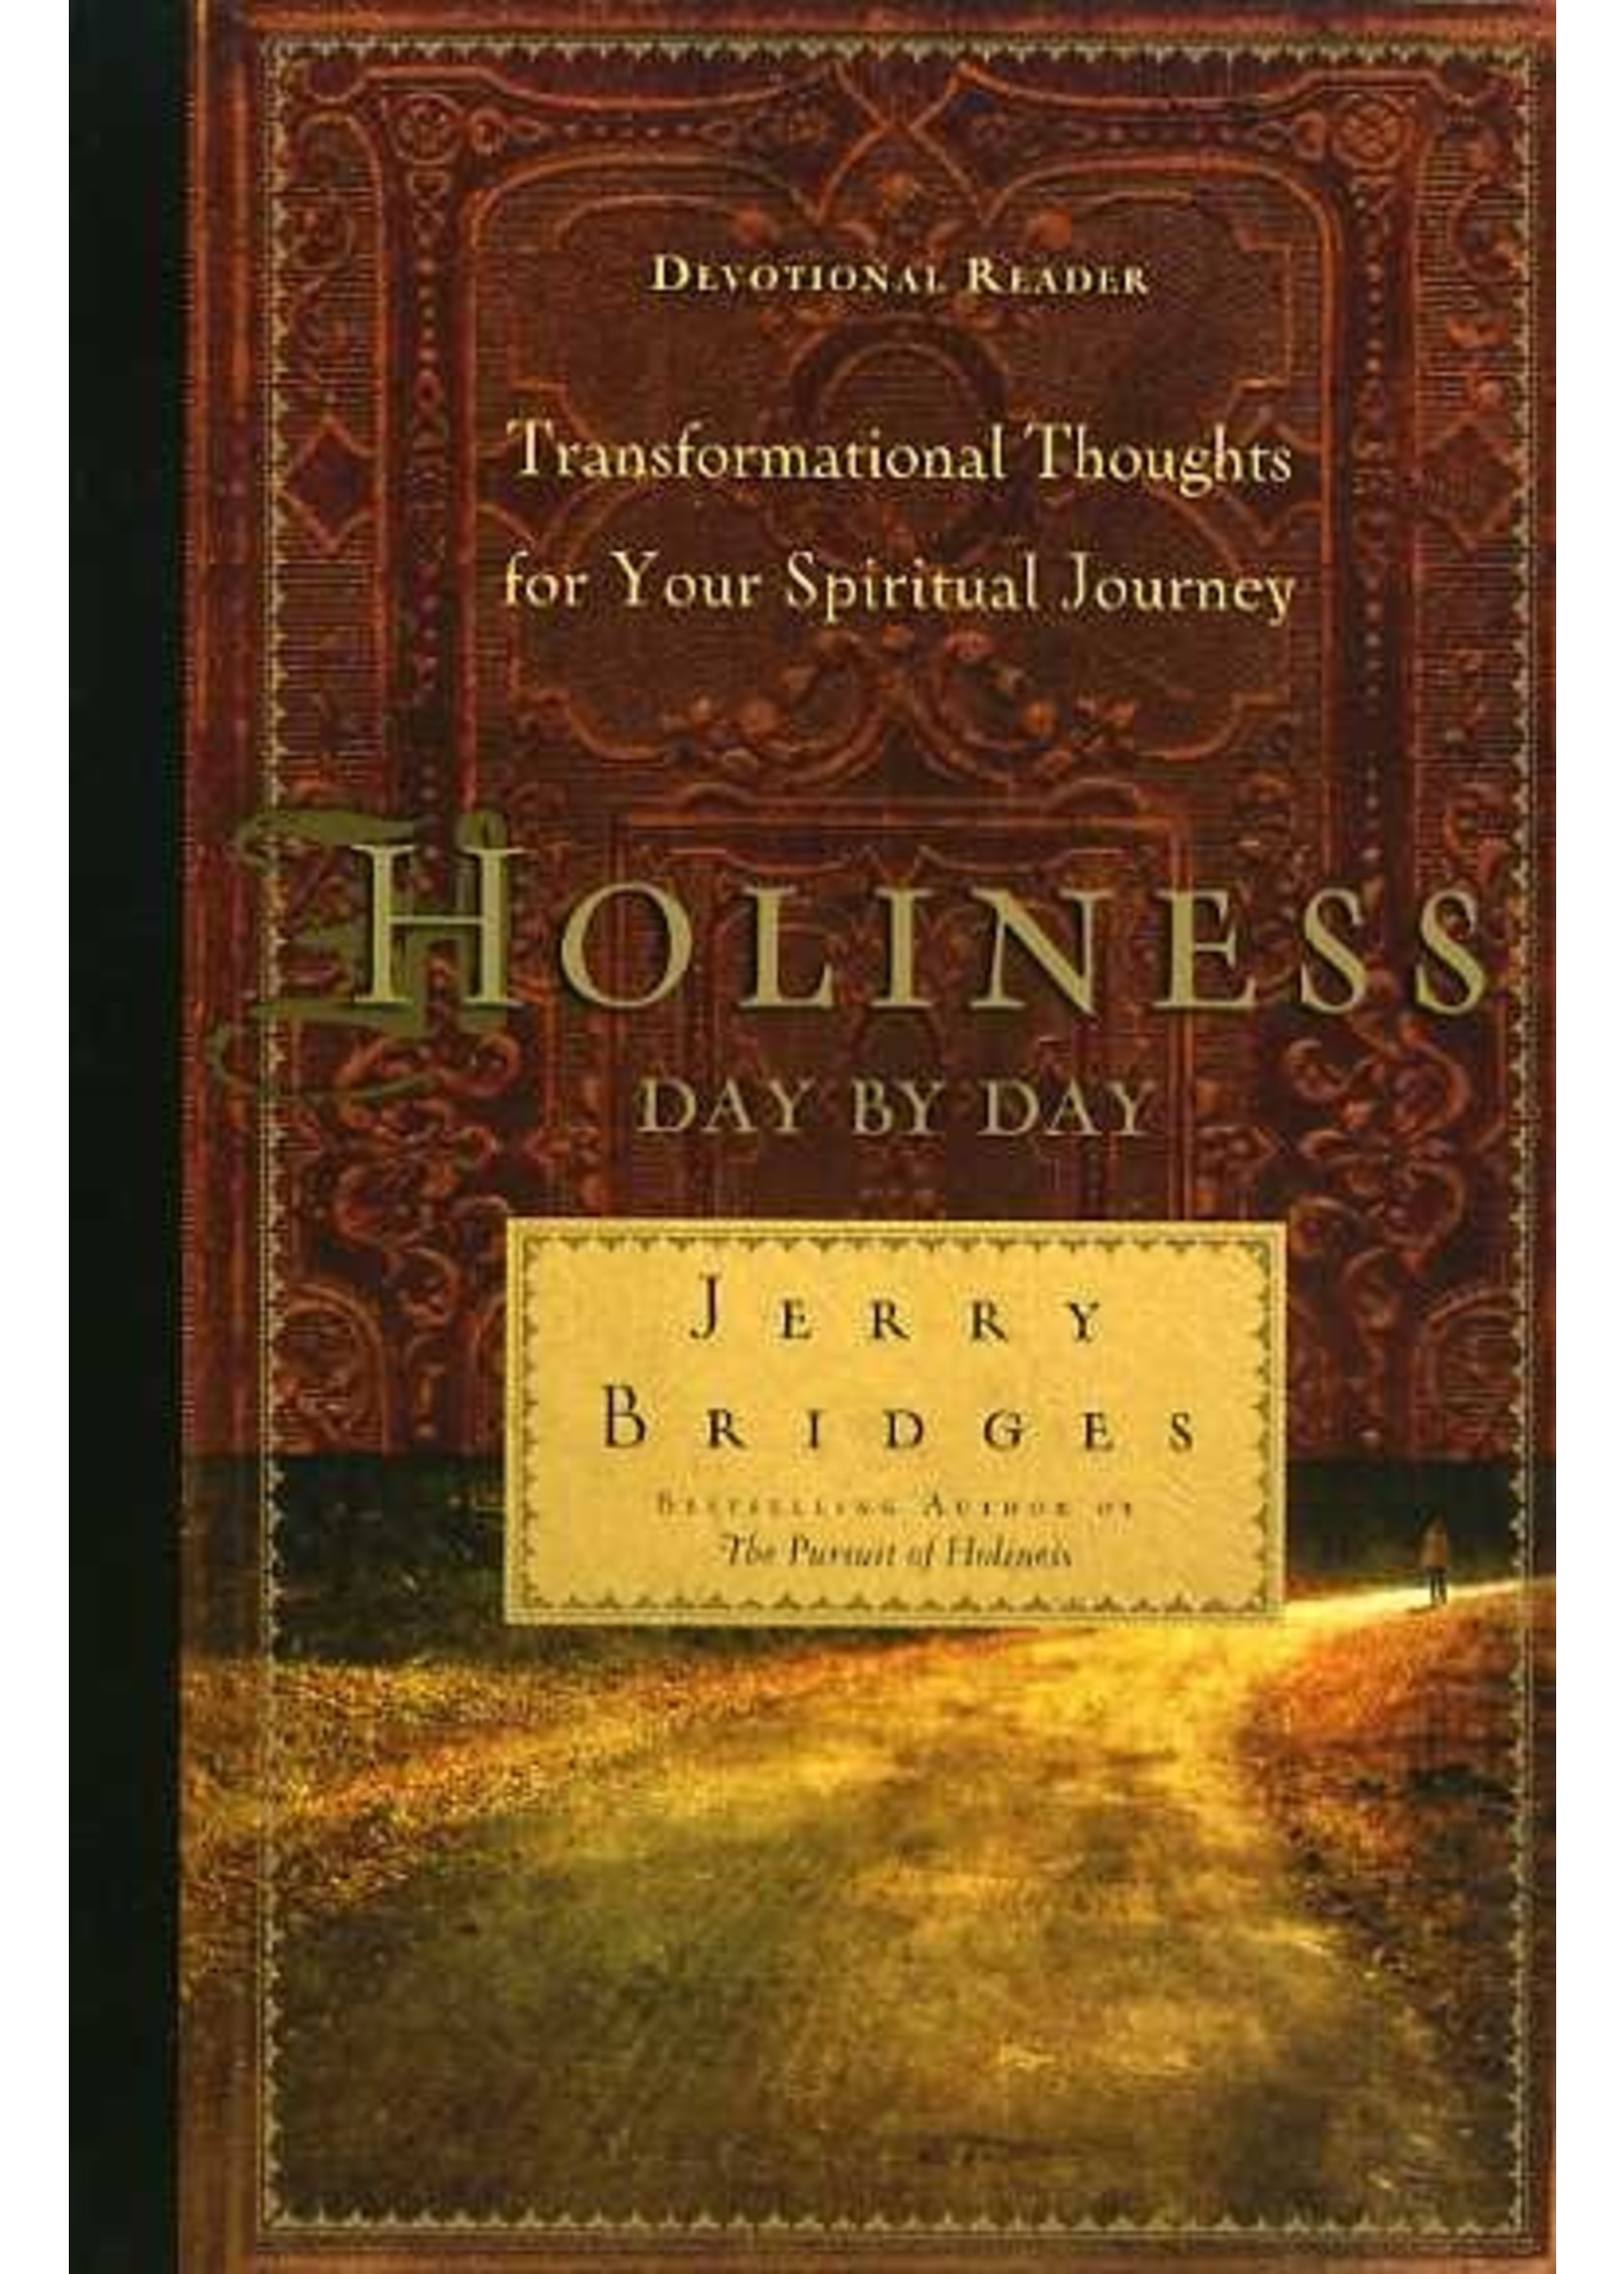 Tyndale Holiness Day by Day - Jerry Bridges